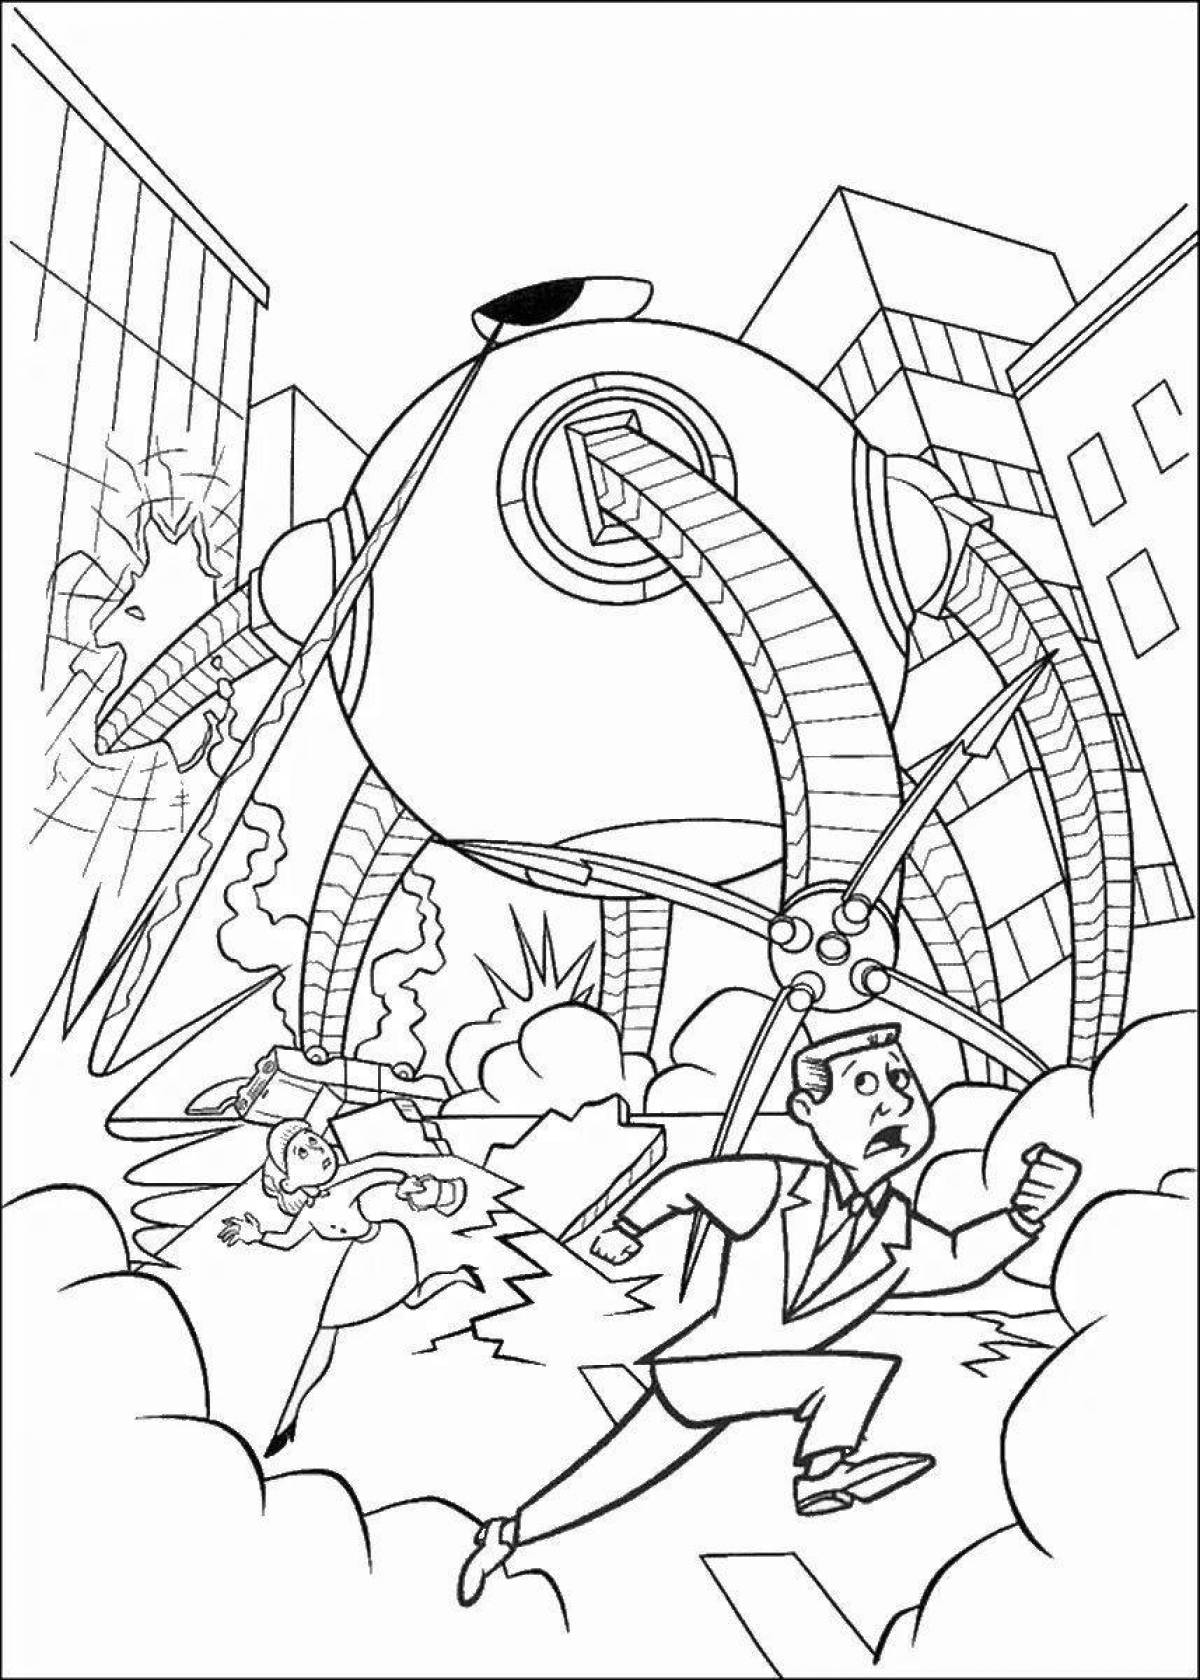 The Incredibles playful coloring book for kids